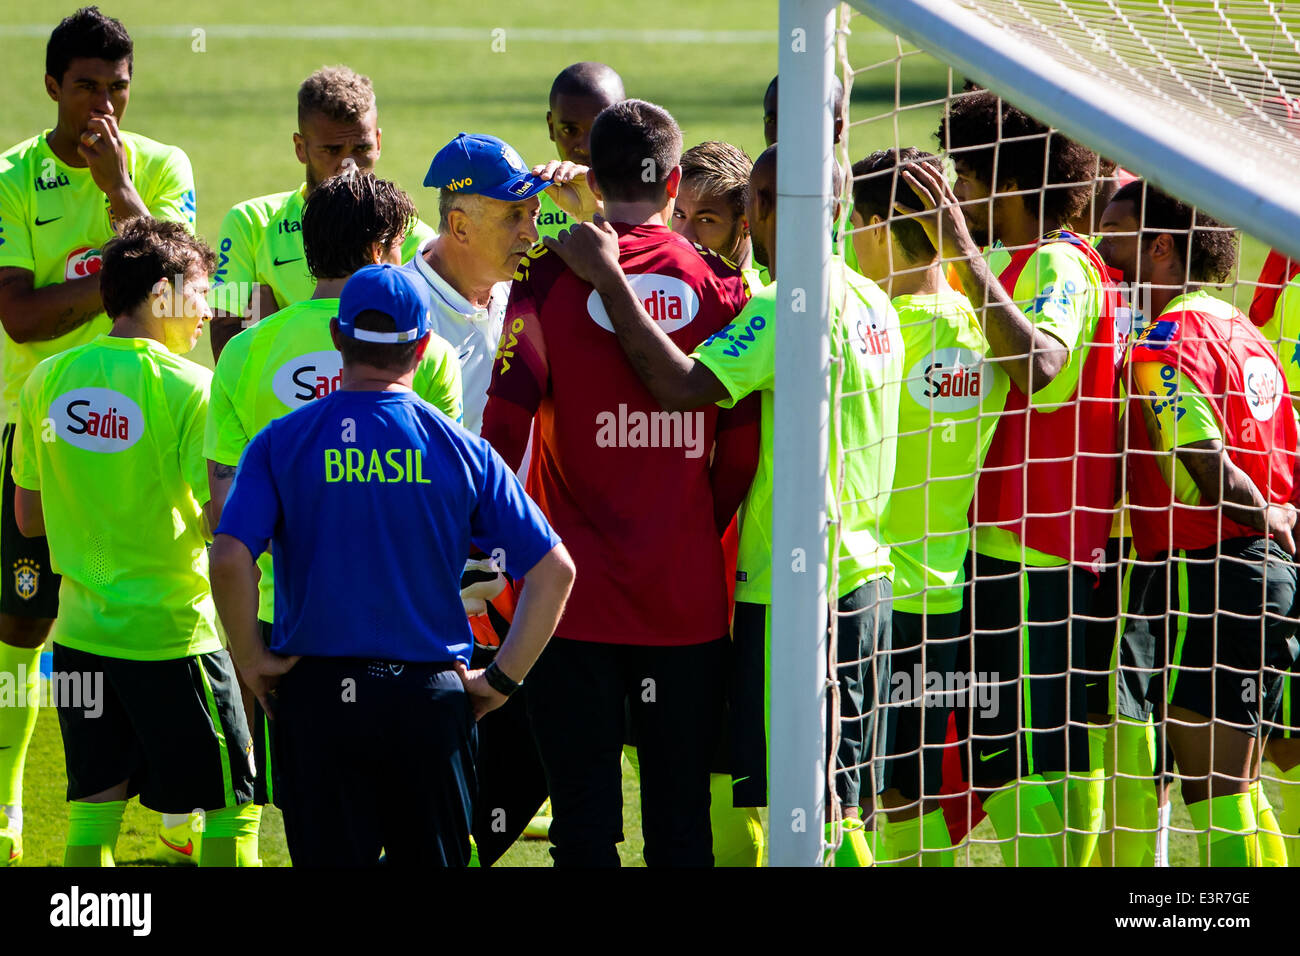 Belo Horizonte, Brazil. 27th June, 2014. Brazil's head coach Luiz Felipe Scolari (C) gives instructions to the players during a training session in Belo Horizonte, Brazil, June 27, 2014. Brazil's national football team participated in a training session for the first match of the Round of 16 here on Friday. © Liu Bin/Xinhua/Alamy Live News Stock Photo